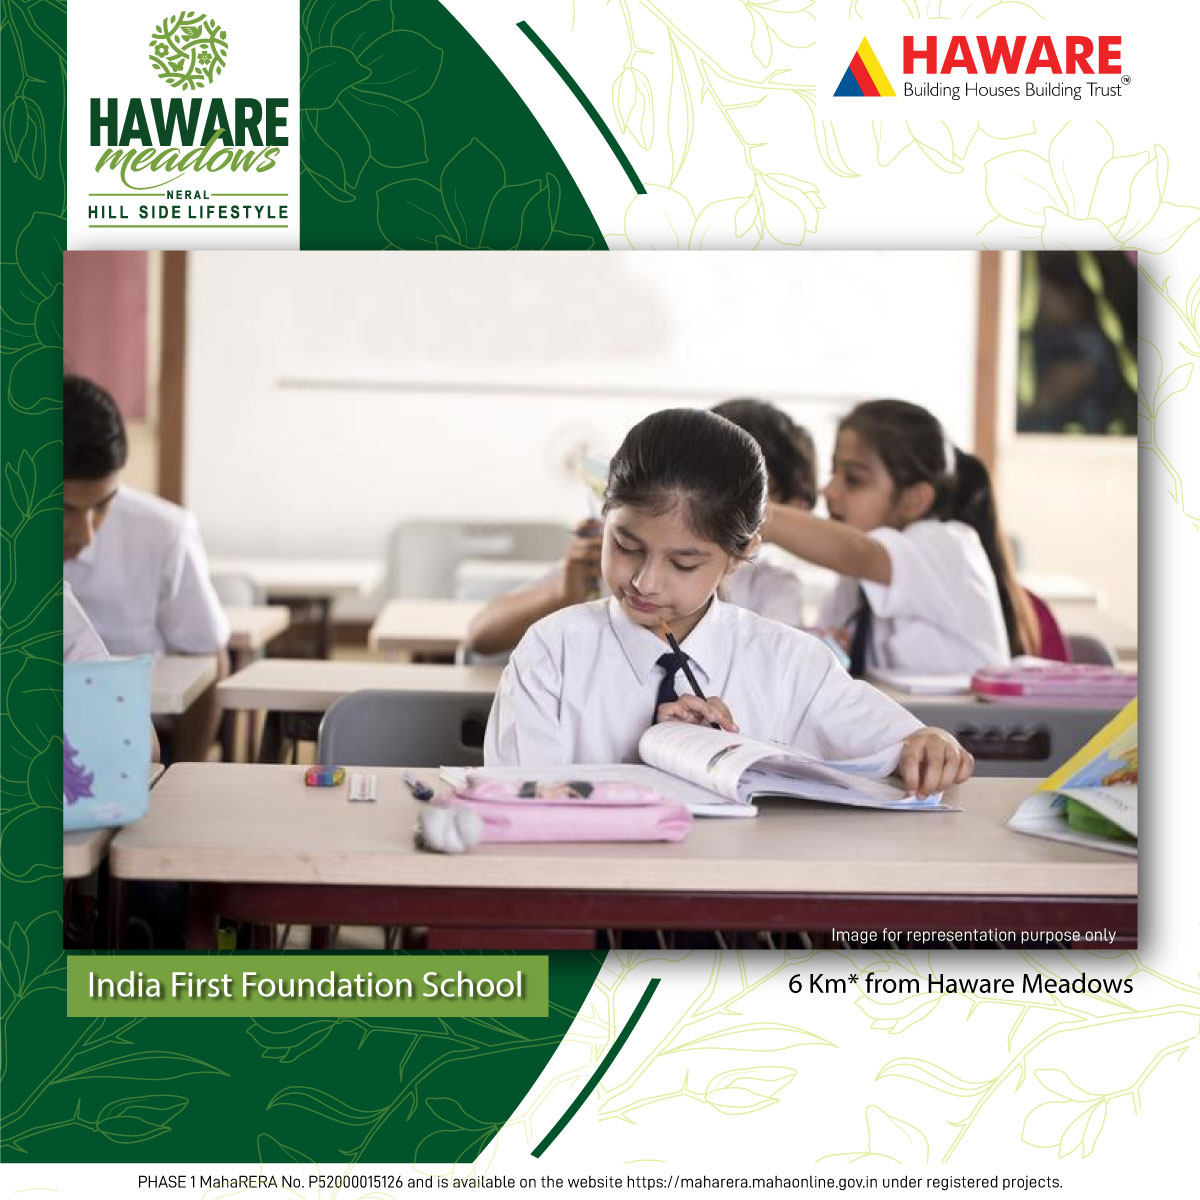 A strong foundation is a rock solid base for raising a lofty institution.

#Hawarebuilders #Haware #HawareMeadows #School #SeamlessConnectivity #Neral #Nature #sustainability #environment #RealEstate #Property #Dreamhome #Lifestyle